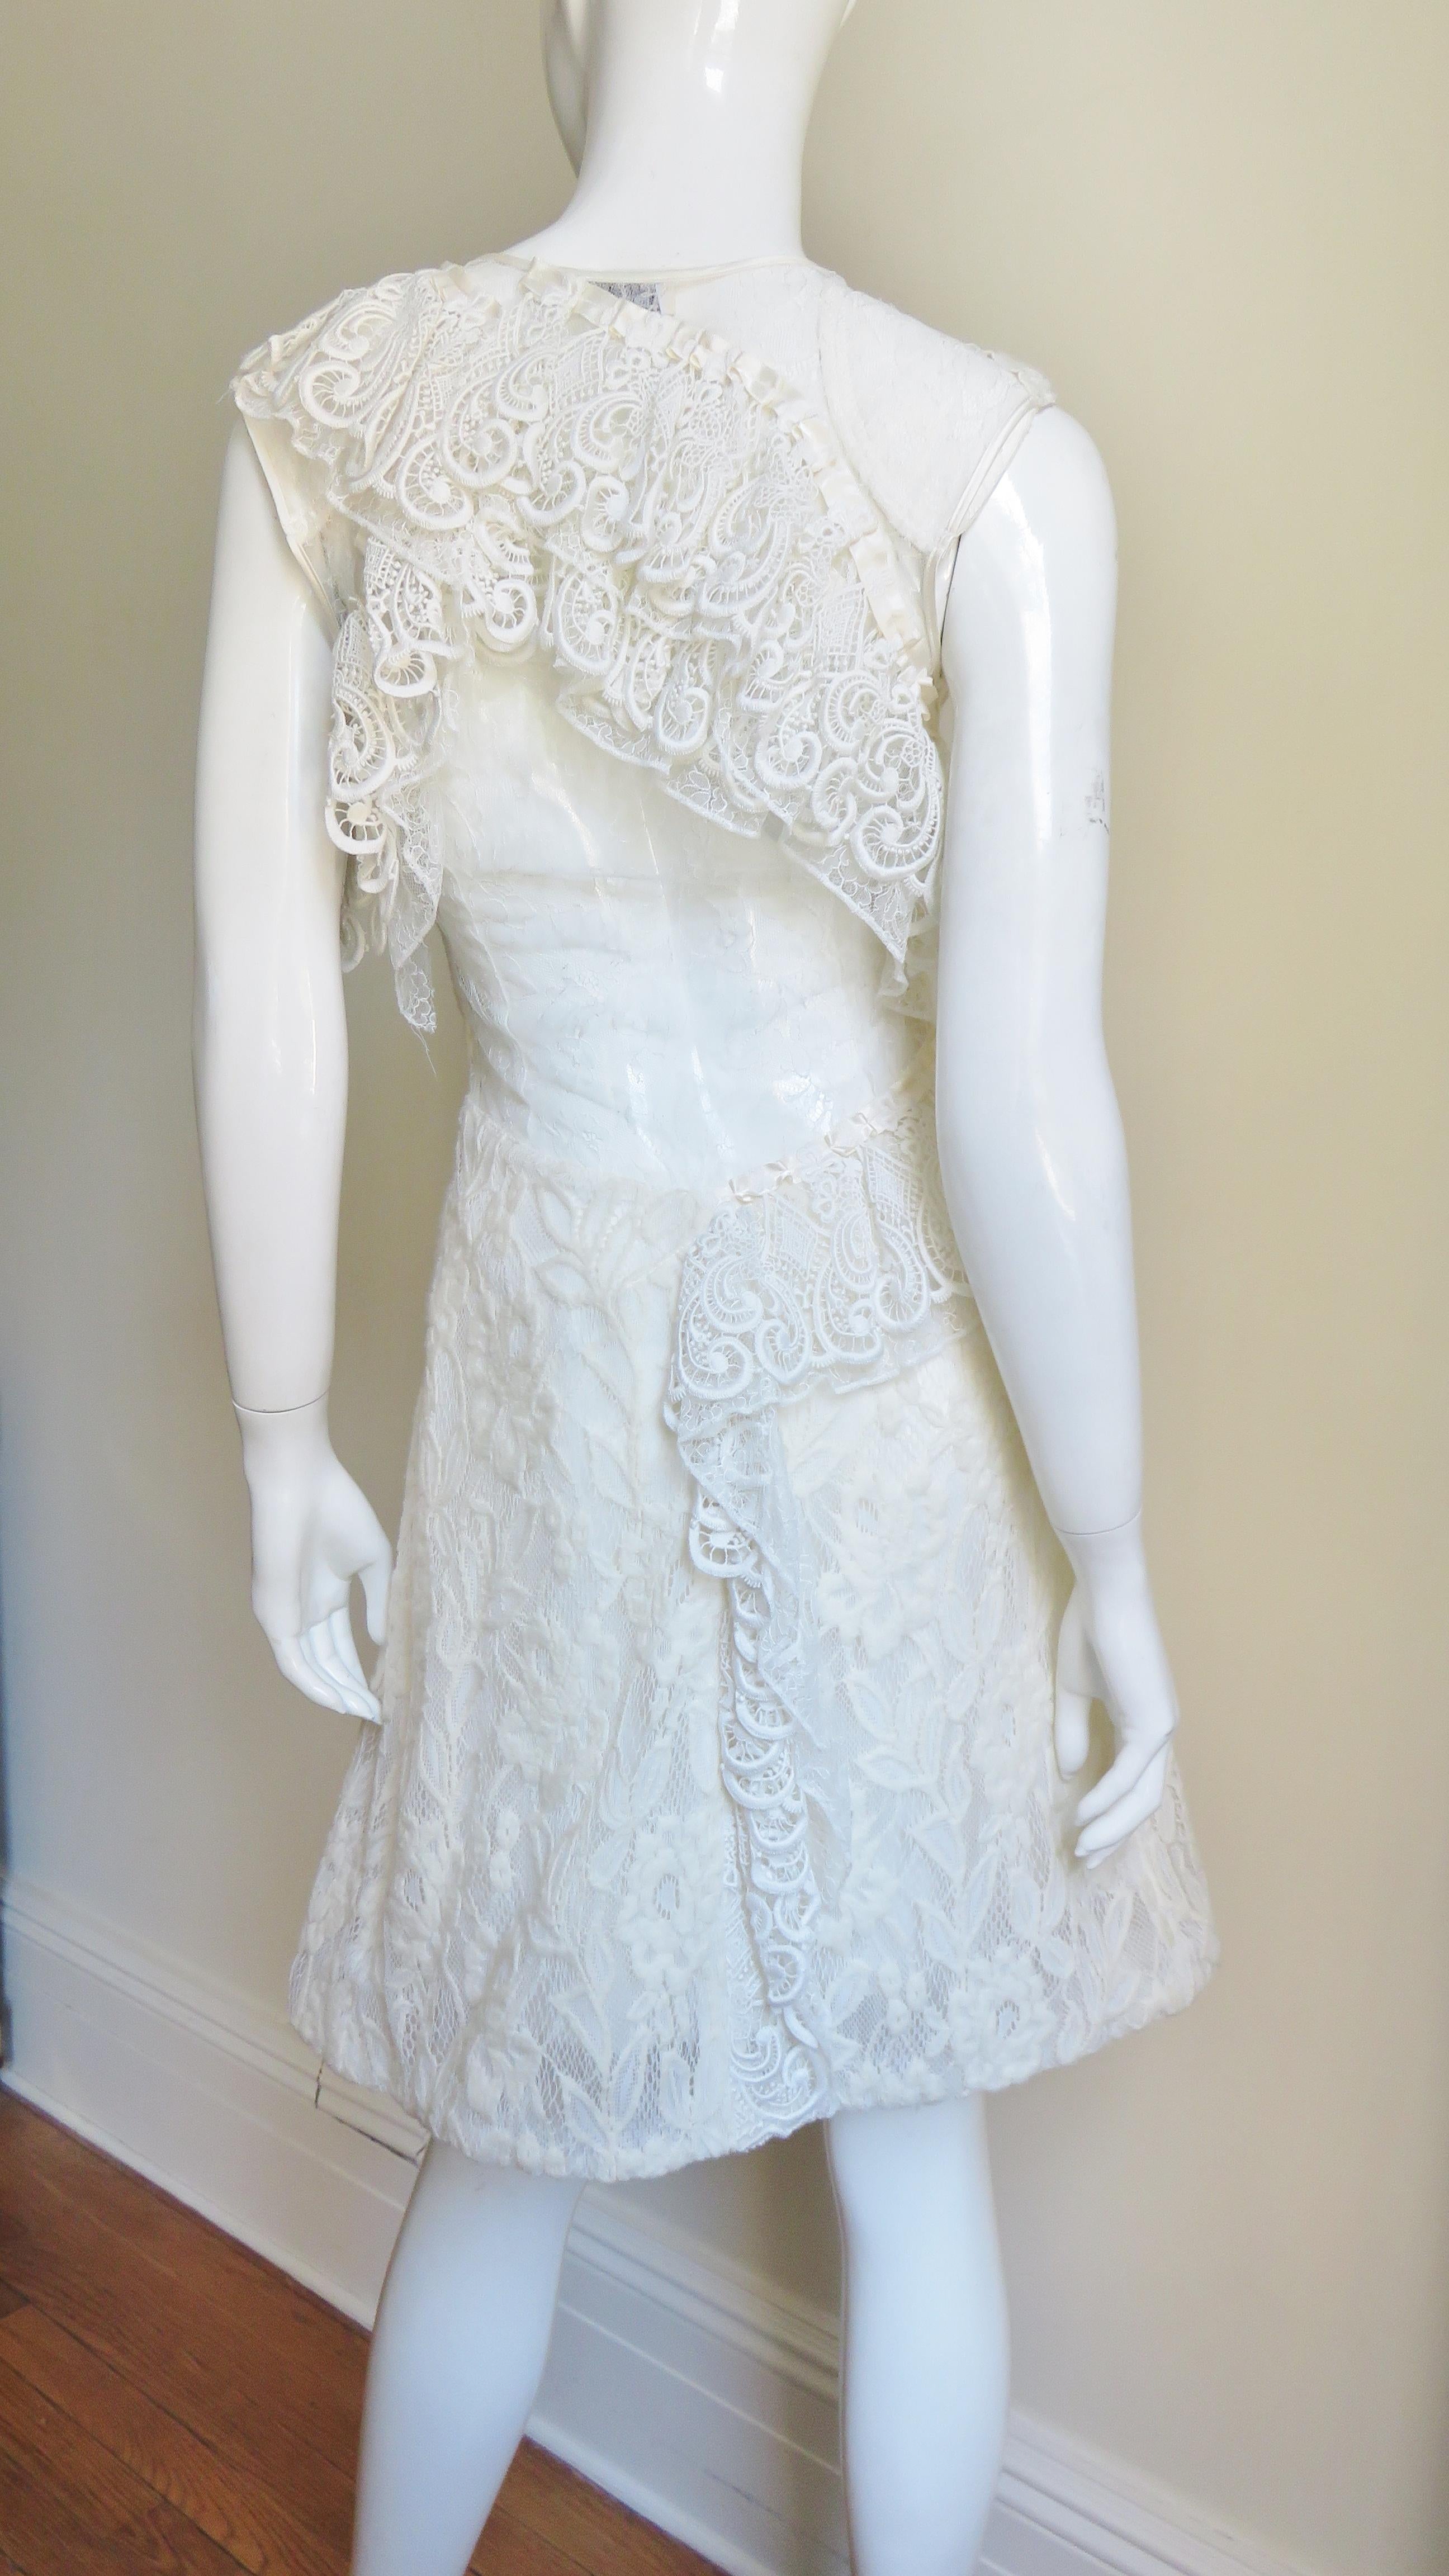 A gorgeous dress from Nina Ricci in elaborate white lace.  From the front it is a simple V neck sleeveless A line dress.  The back has a lace covered cut out from below the waist to the shoulders framed with lace ruffles. It has a side zipper.
Fits